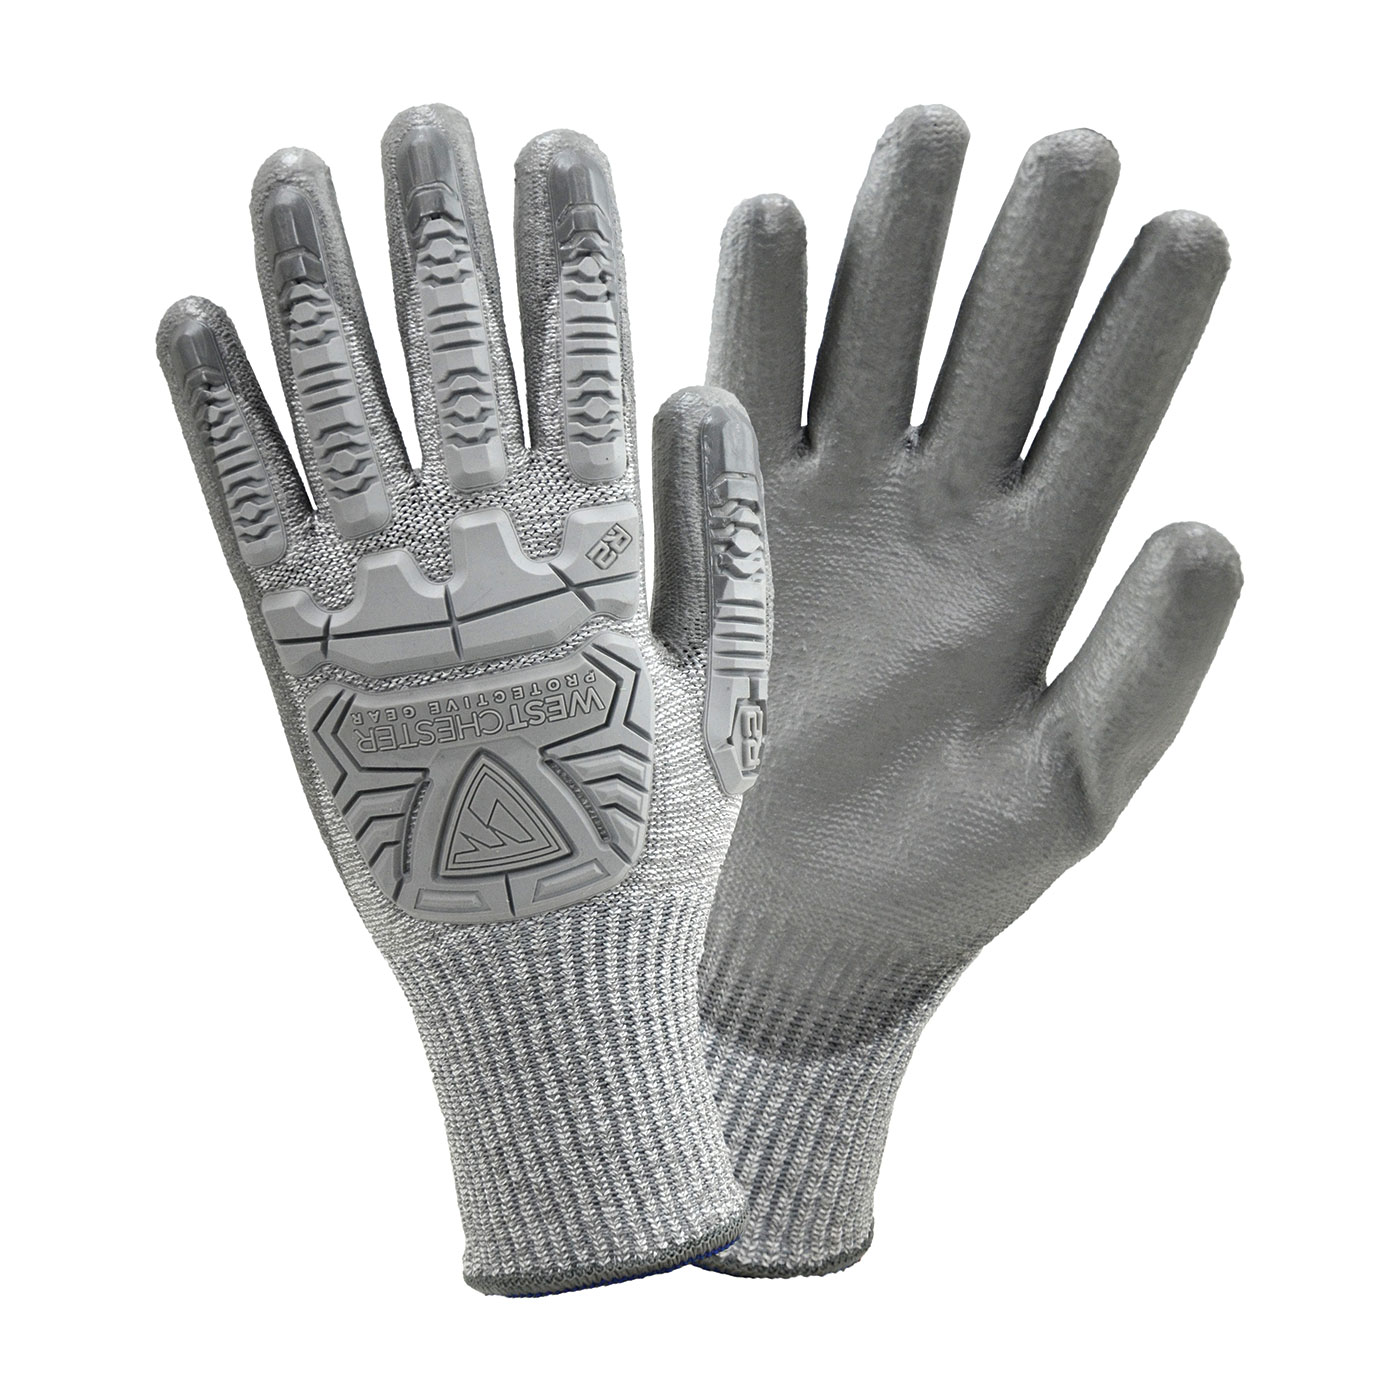 #710HGUB PIP® West Chester R2 Silver Fox Seamless Knit Glove with Impact Protection and PU Coated Palm Grip